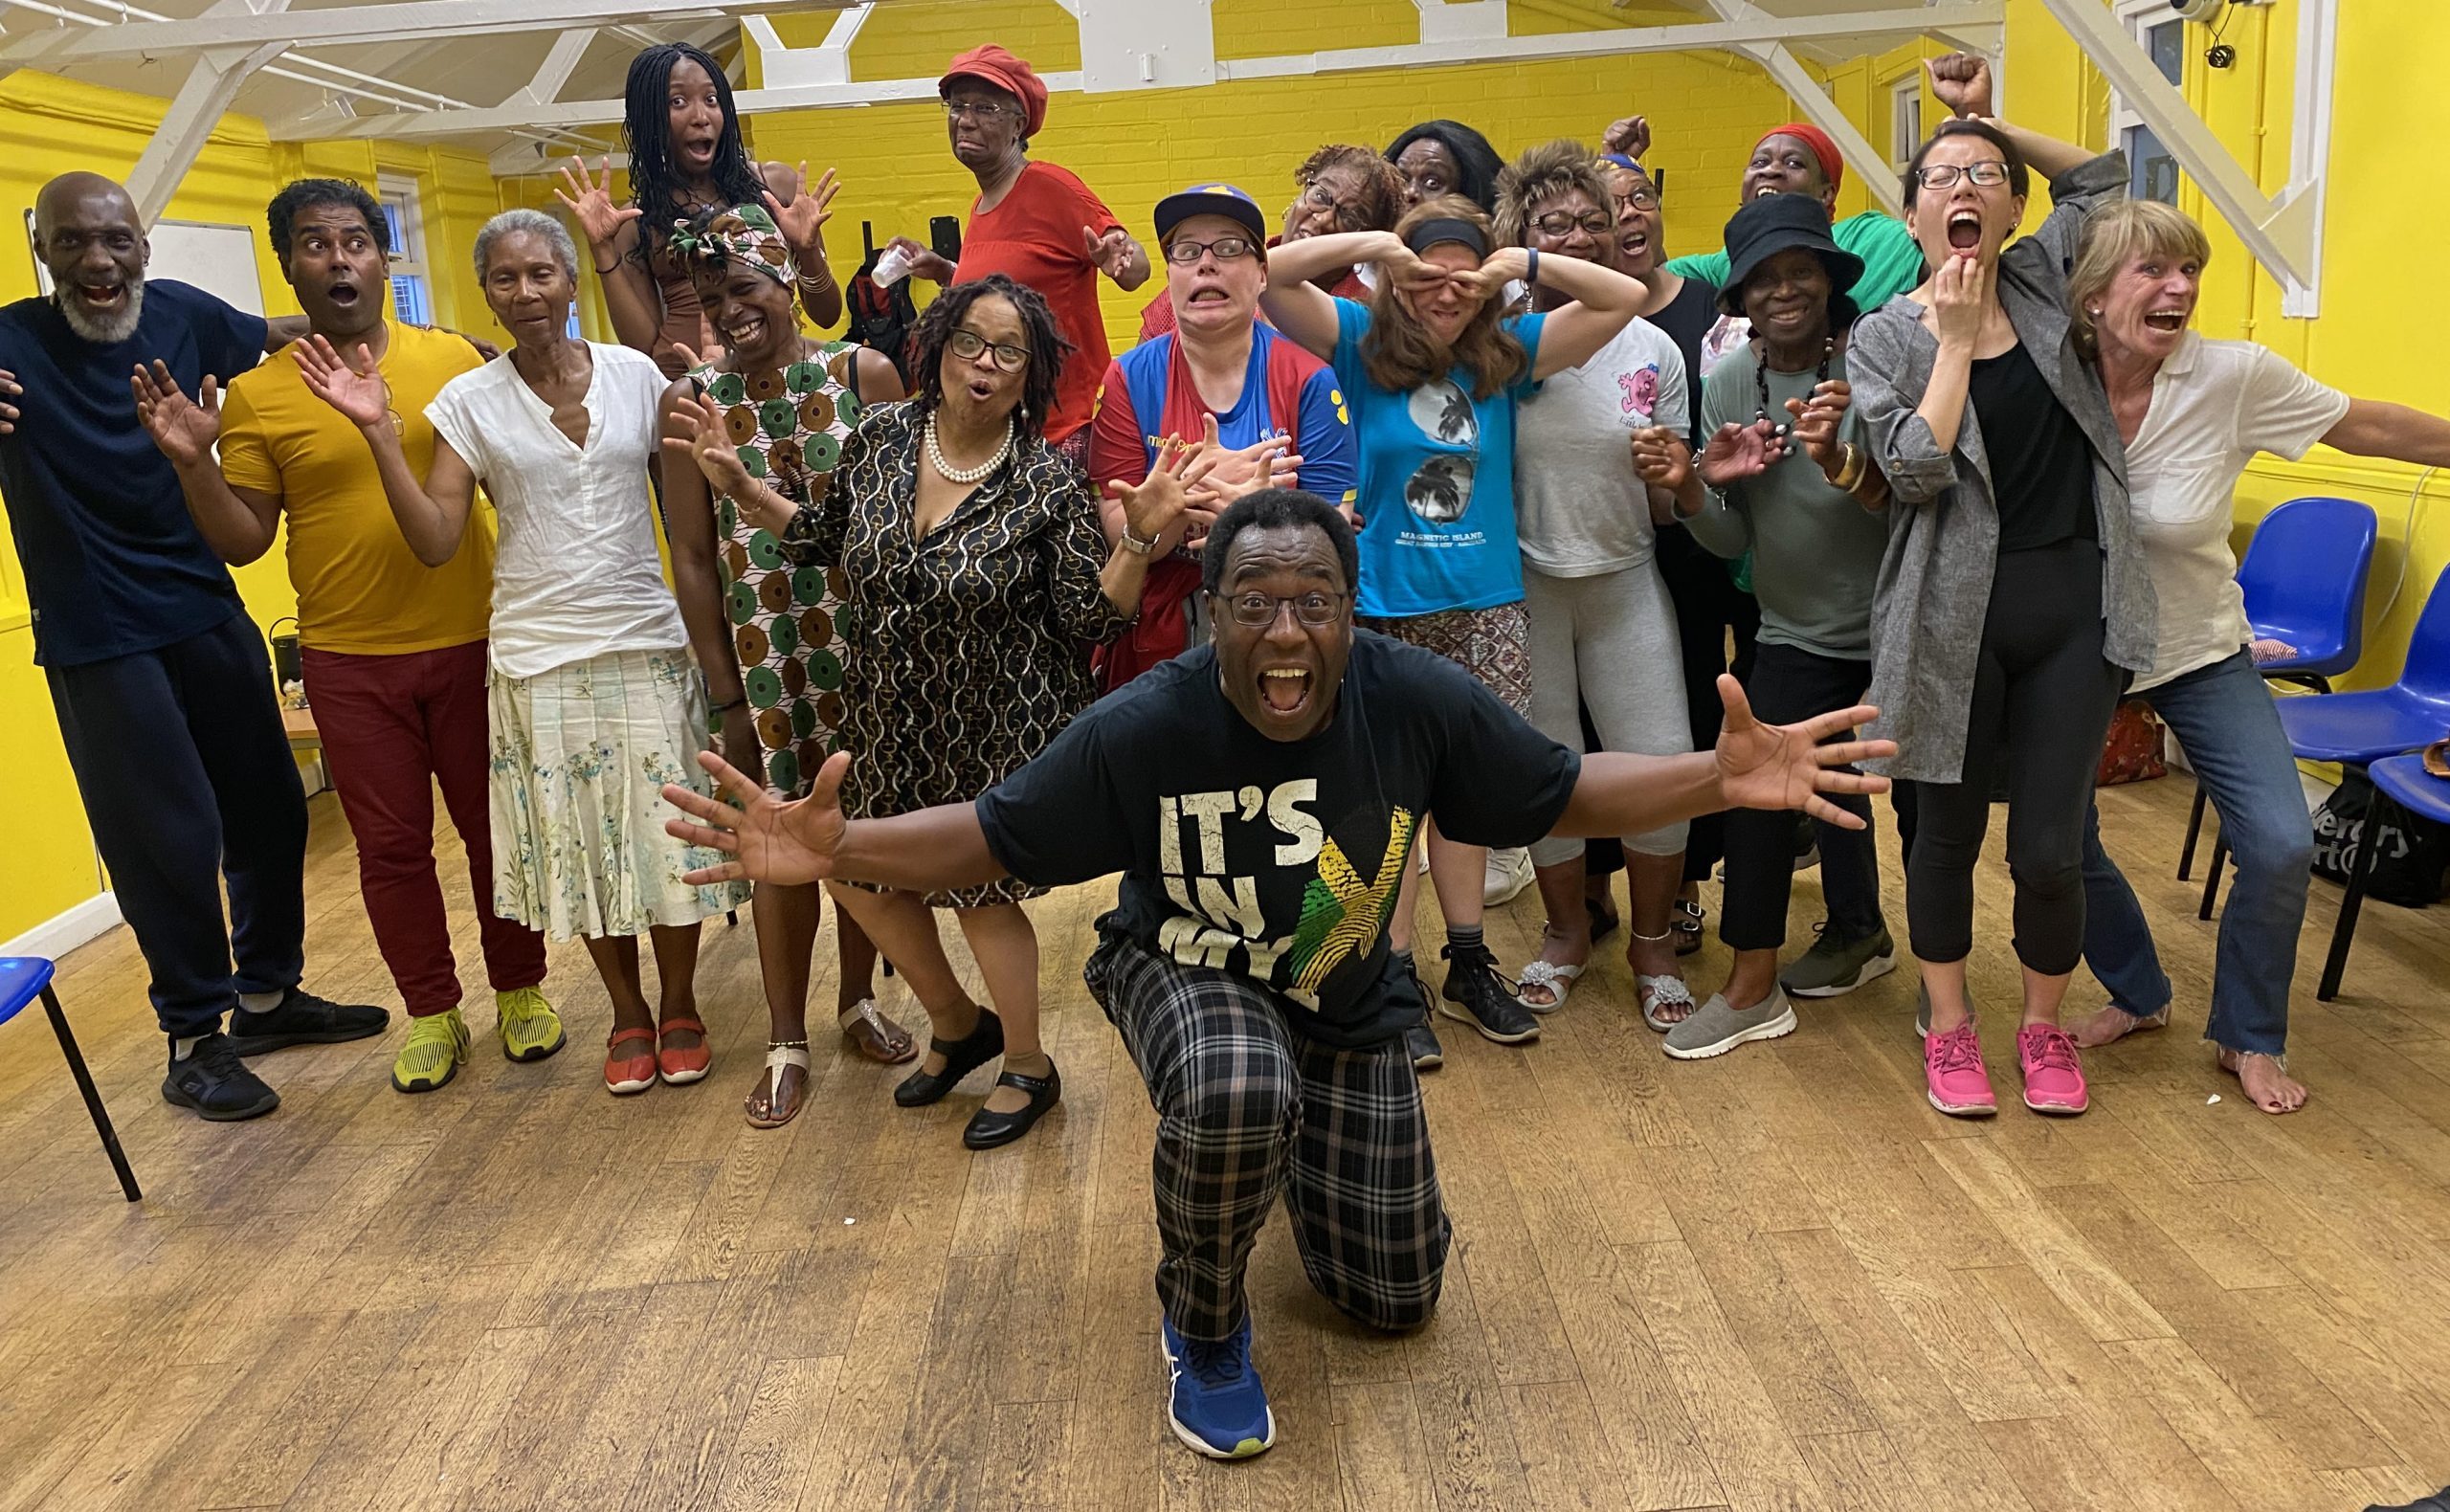 Rehearsal of the Windrush Playback Stories Project, by 429 Korna Klub in Brixton, which is a member of the Windrush 75 Network